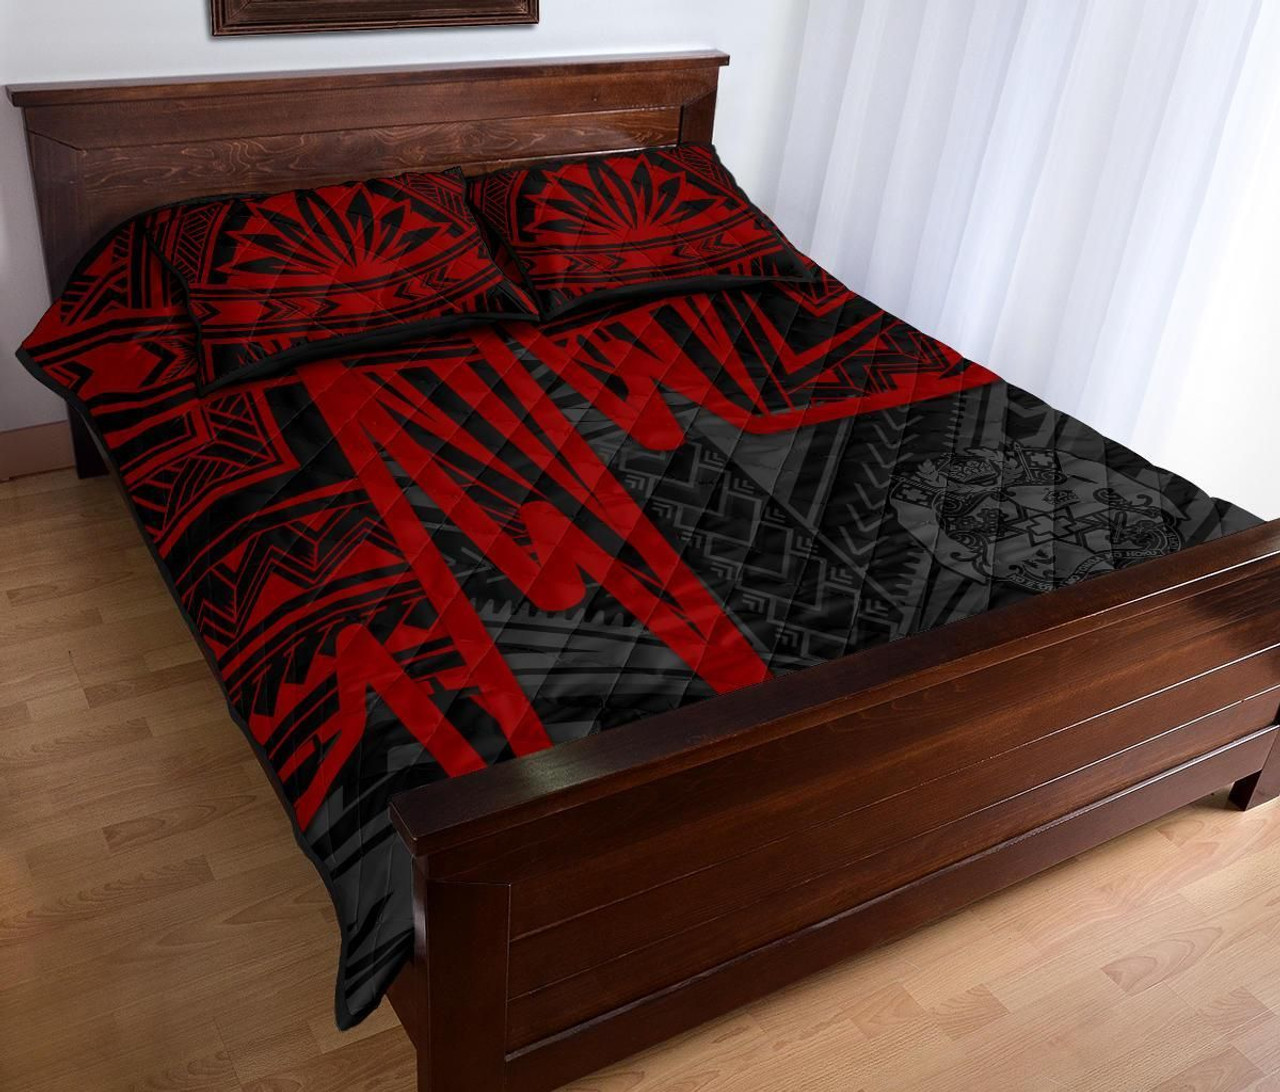 Tonga Quilt Bed Set - Tonga Seal In Heartbeat Patterns Style (Red) 4